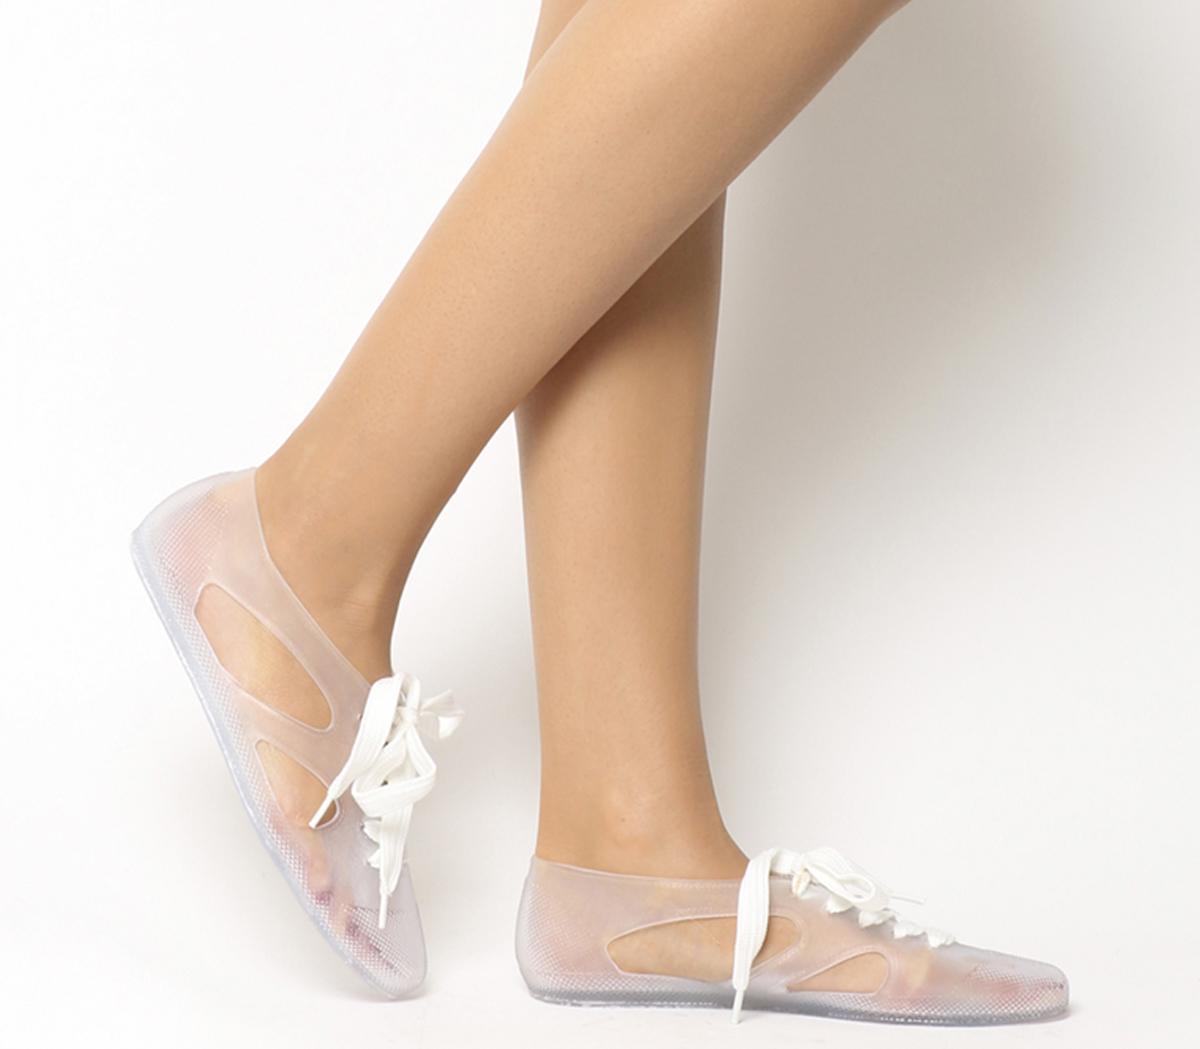 clear flat shoes